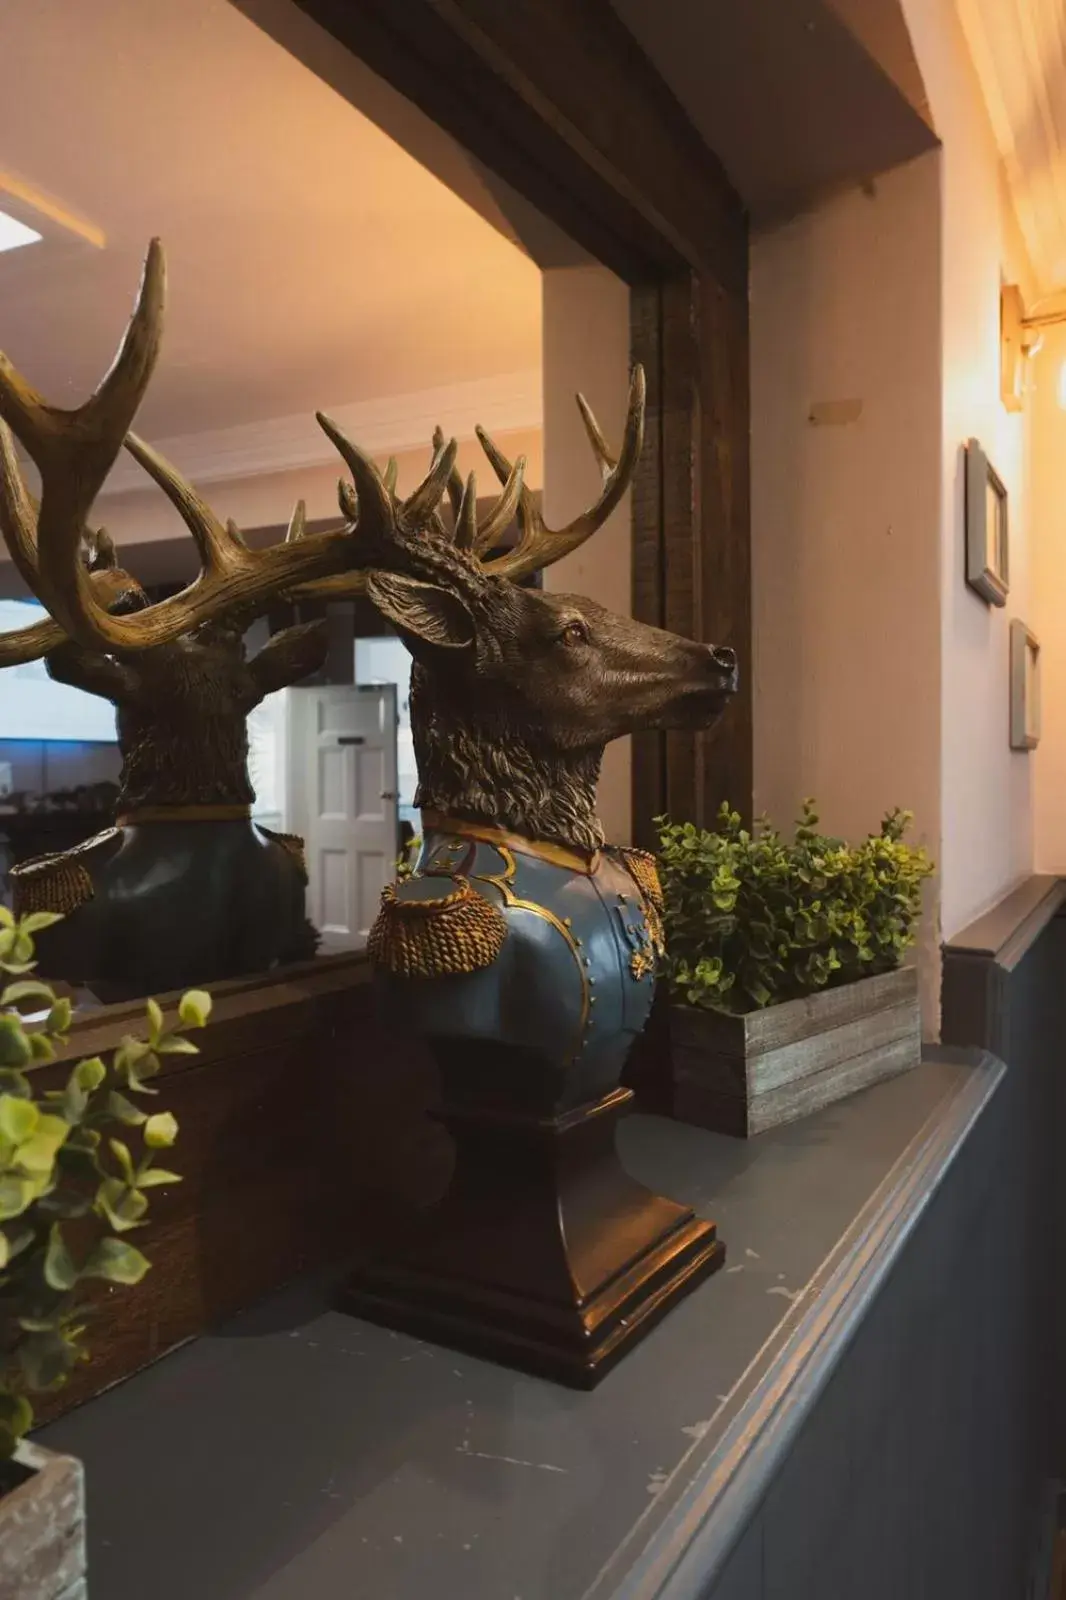 Decorative detail in The Stag Hotel, Restaurant and Bar